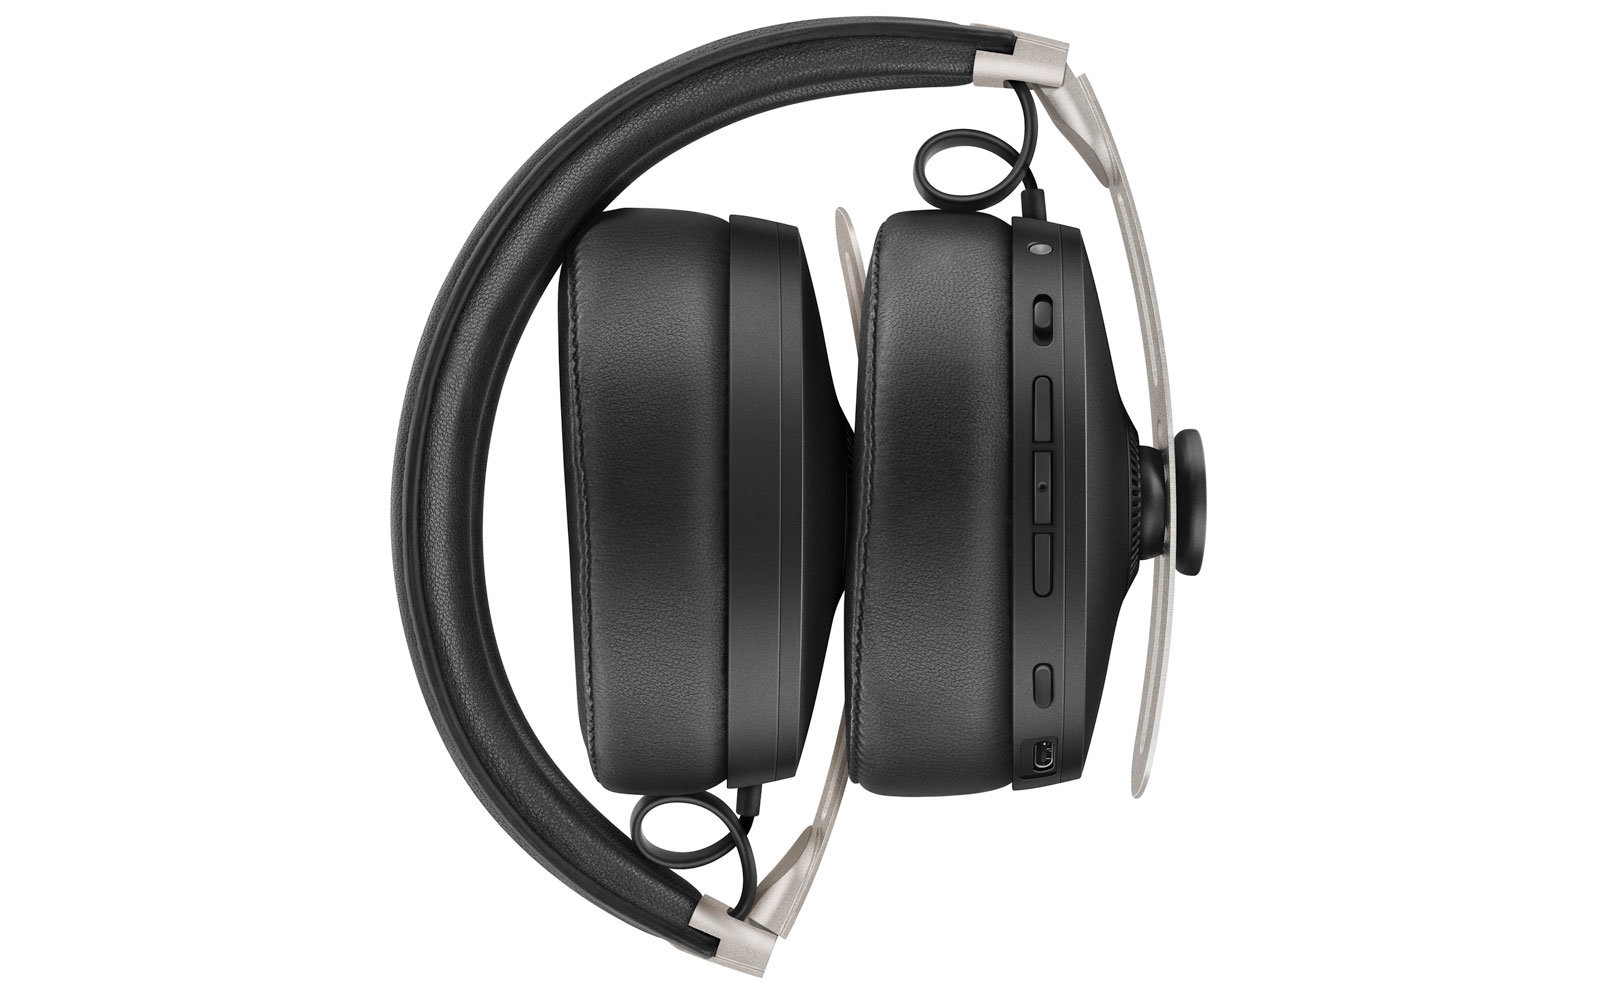 Sennheiser's new Momentum headphones are improved, but still pricey | DeviceDaily.com